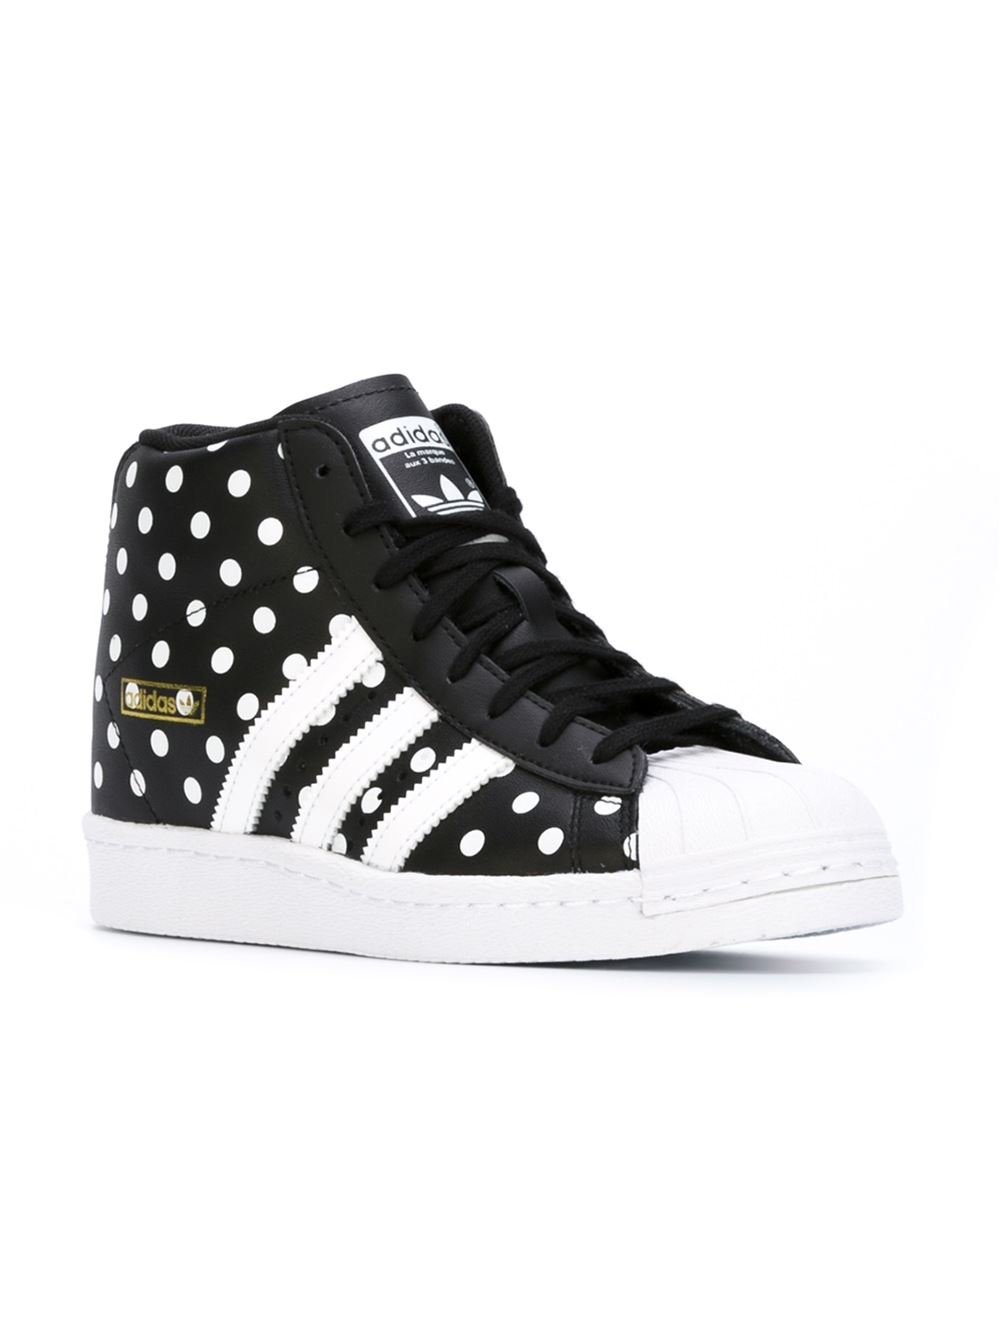 adidas Leather 'superstar Up' Hi-top Sneakers in Black - Lyst